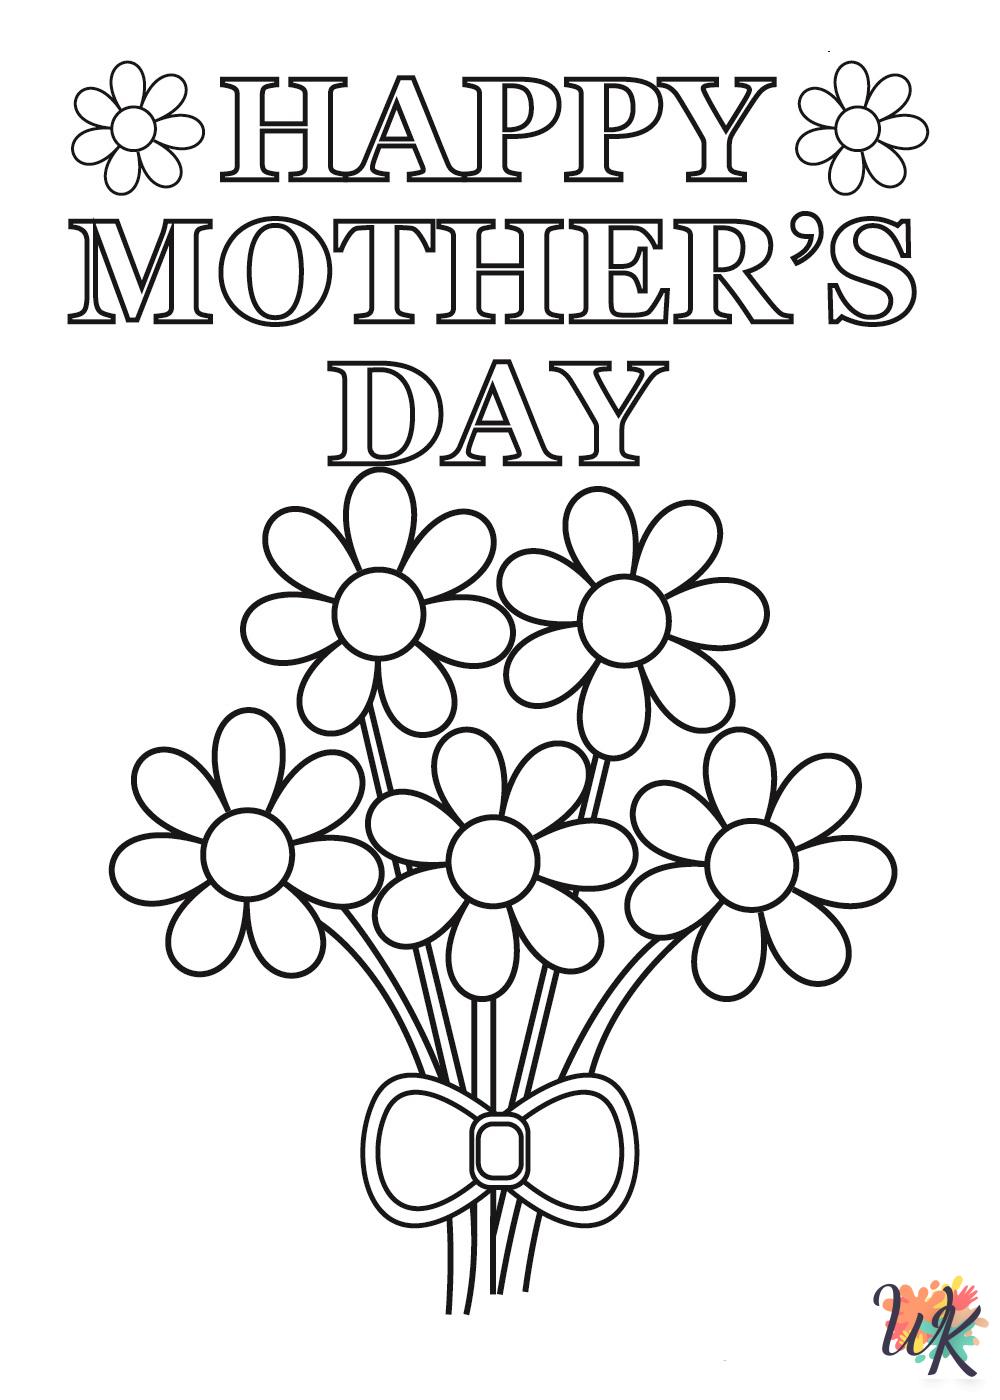 merry Mother's day coloring pages